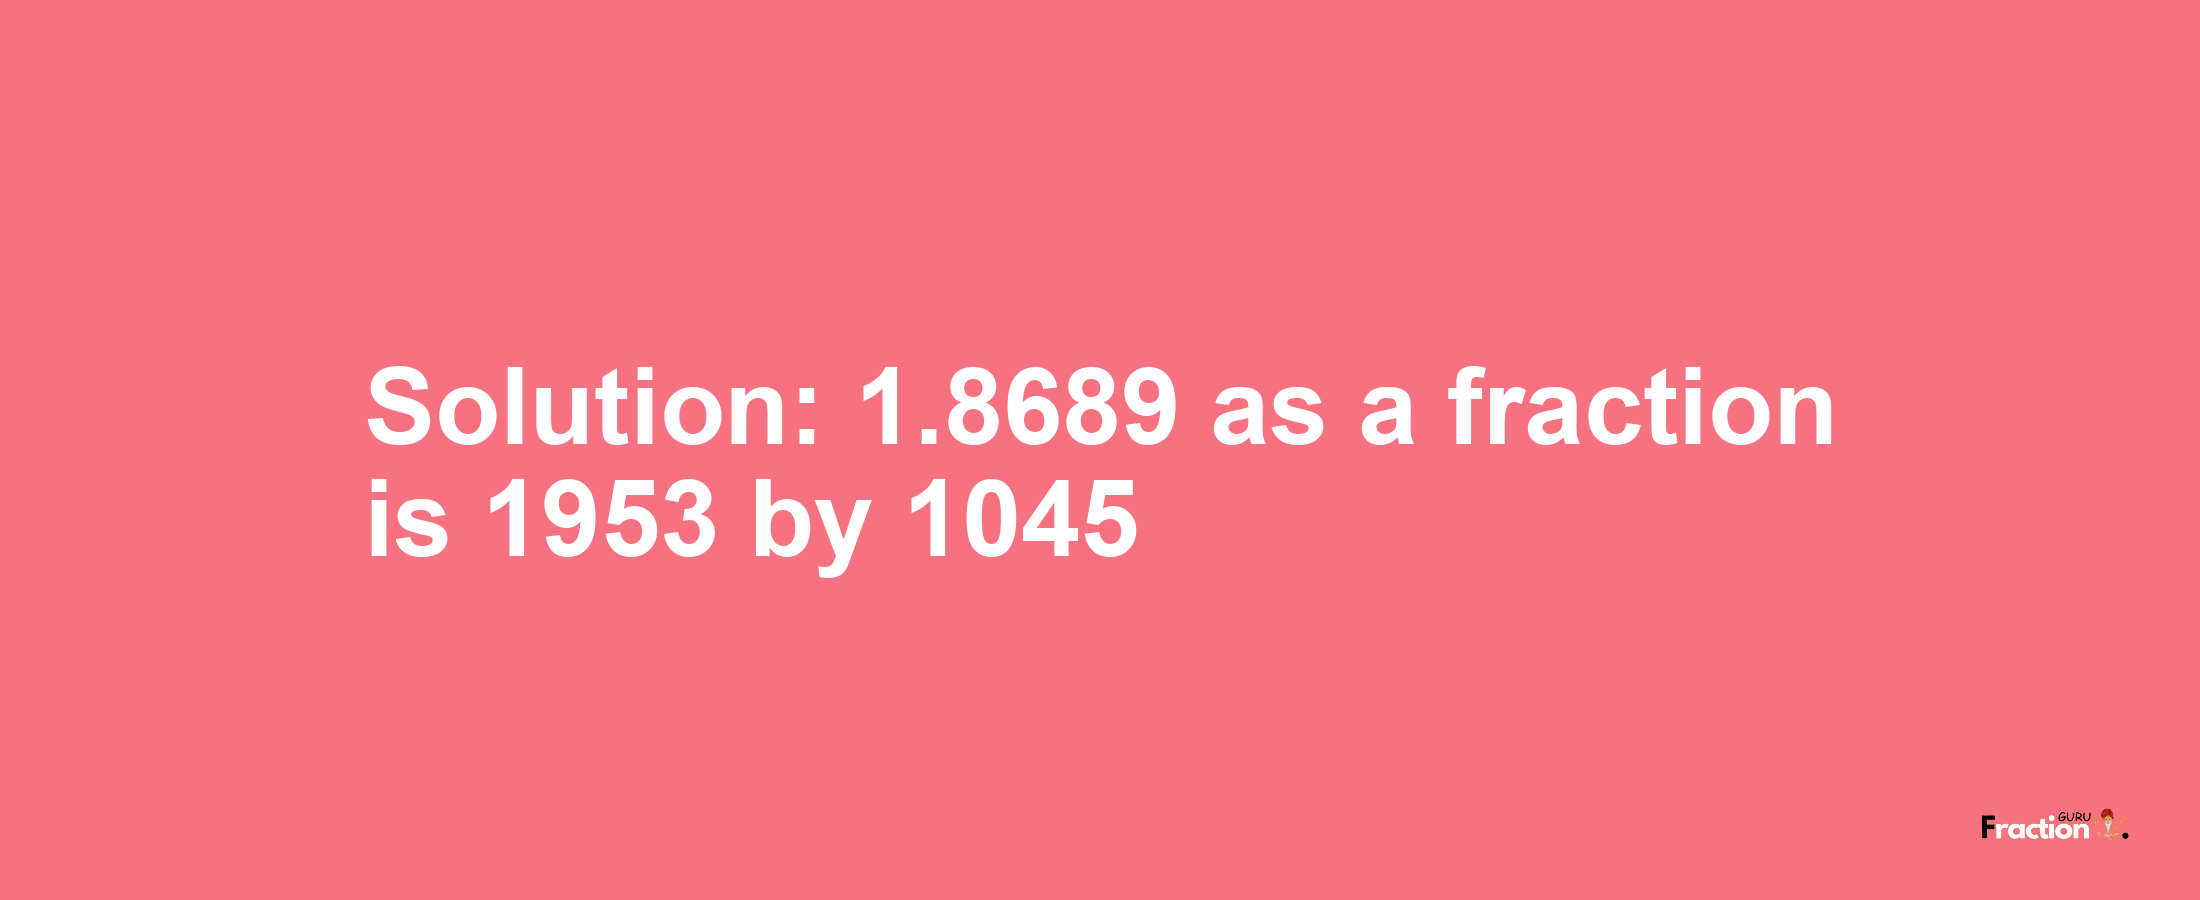 Solution:1.8689 as a fraction is 1953/1045